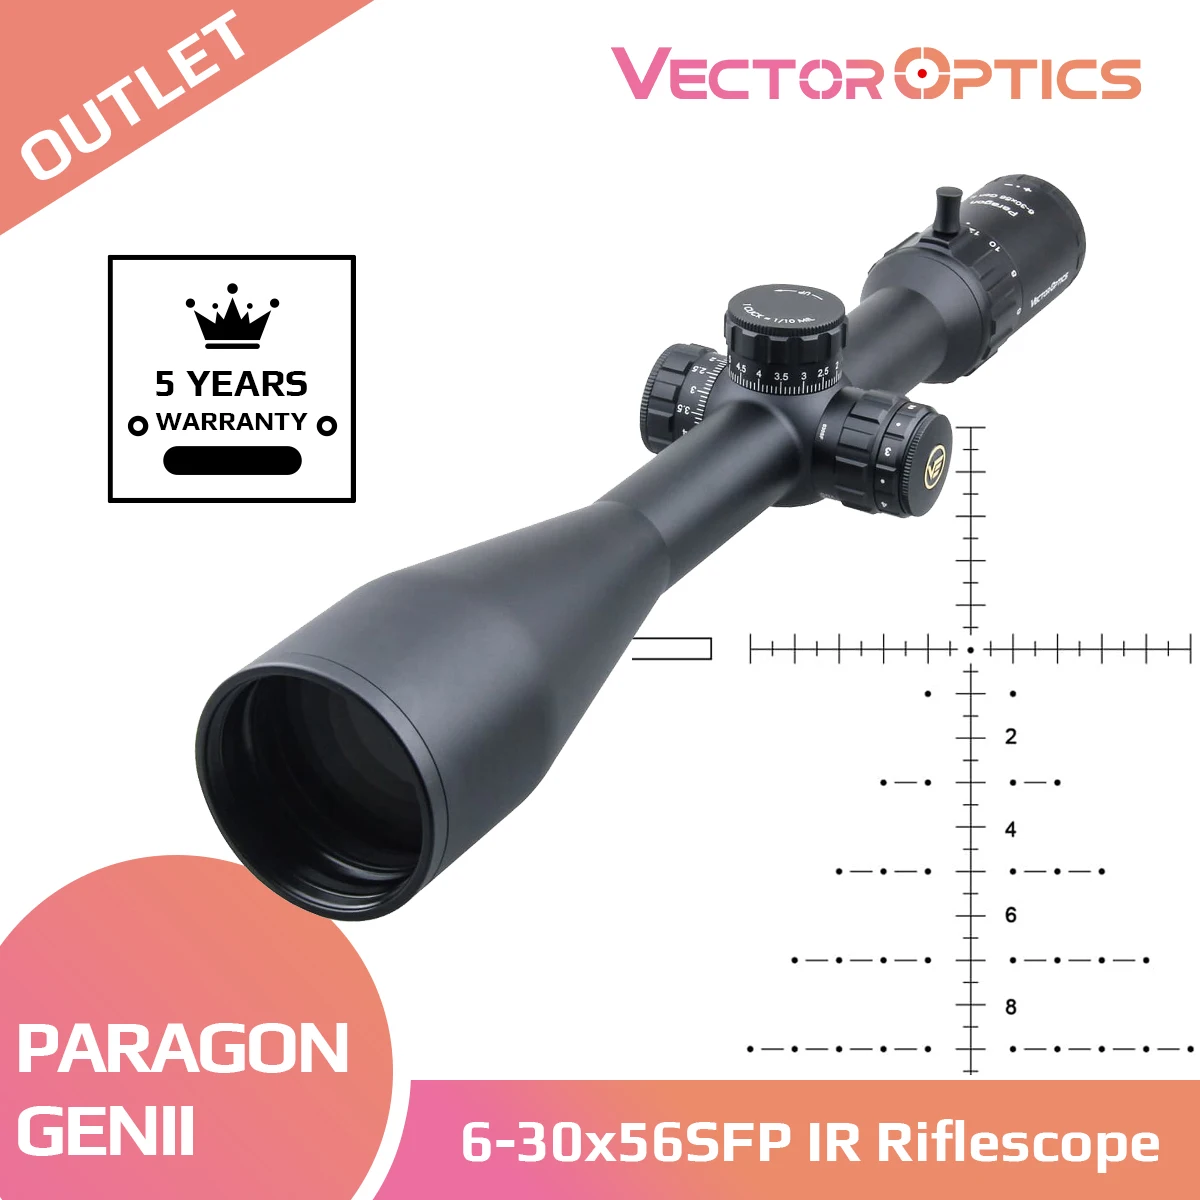 

Vector Optics Paragon Gen2 6-30x56 Tactical 1/10 MIL Rifle Scope Long Eye Relief Riflescope Turret Lock 30mm with Mount